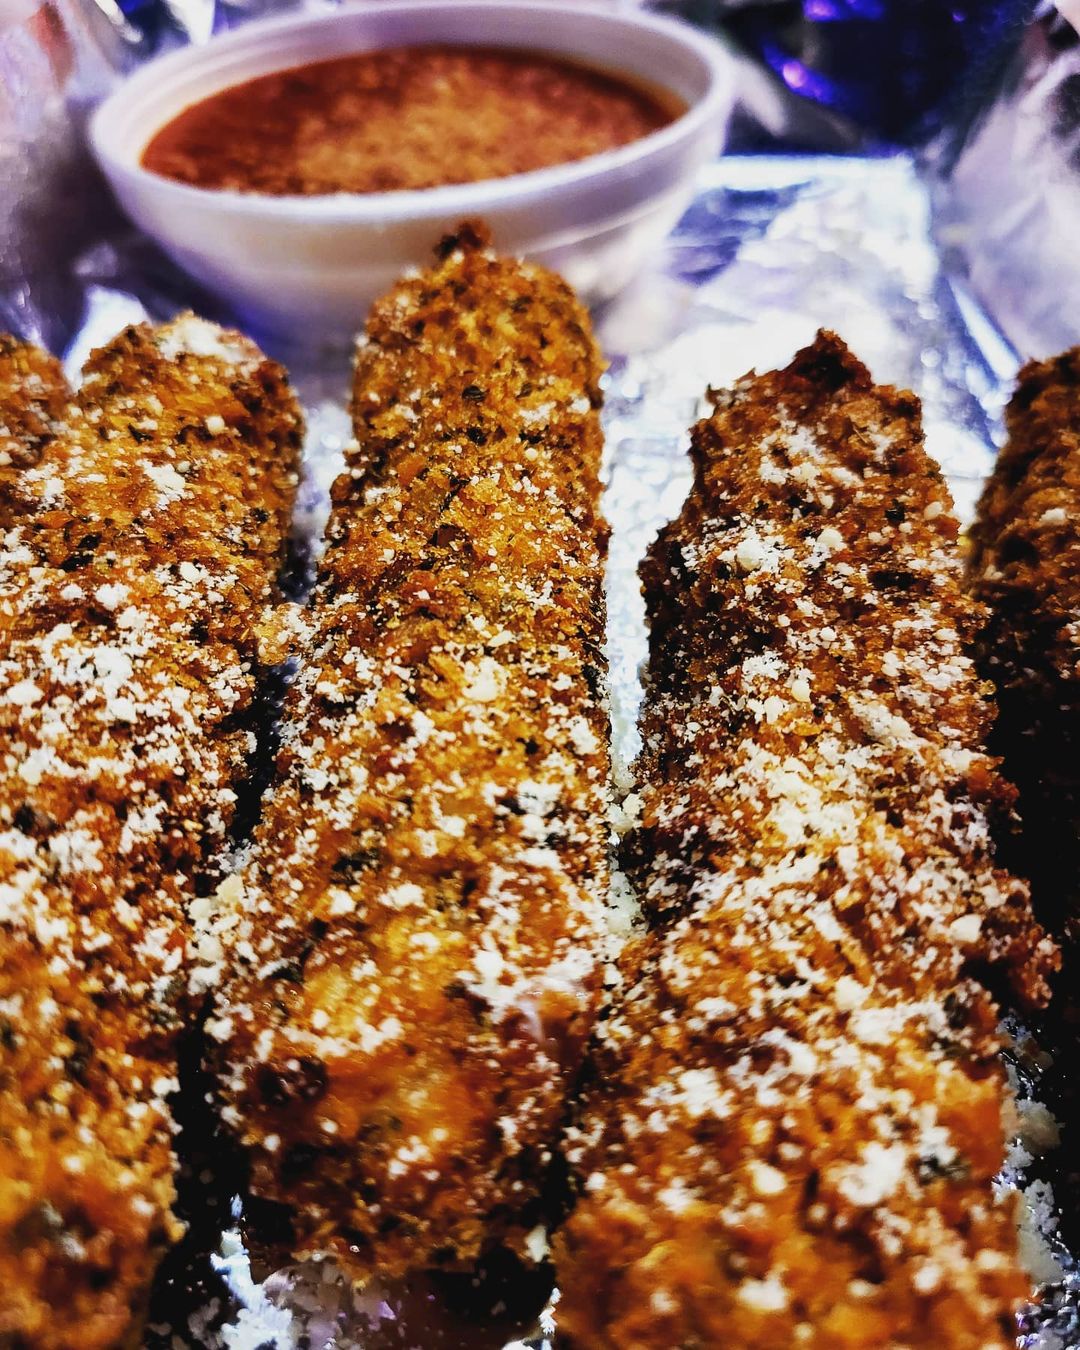 A plate of fried chicken sticks with dipping sauce.